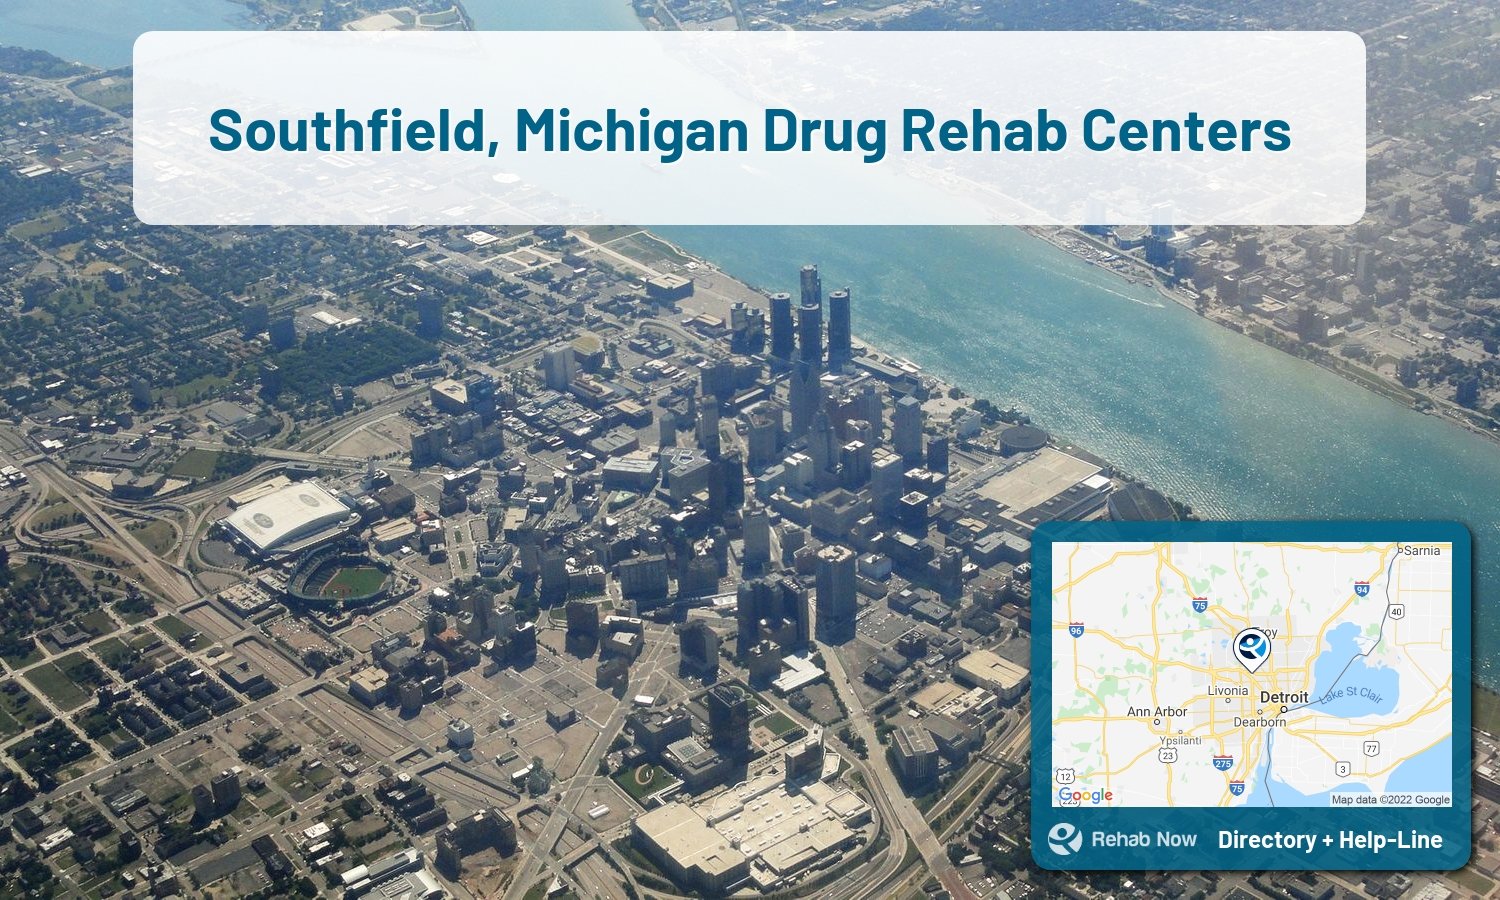 Southfield, MI Treatment Centers. Find drug rehab in Southfield, Michigan, or detox and treatment programs. Get the right help now!